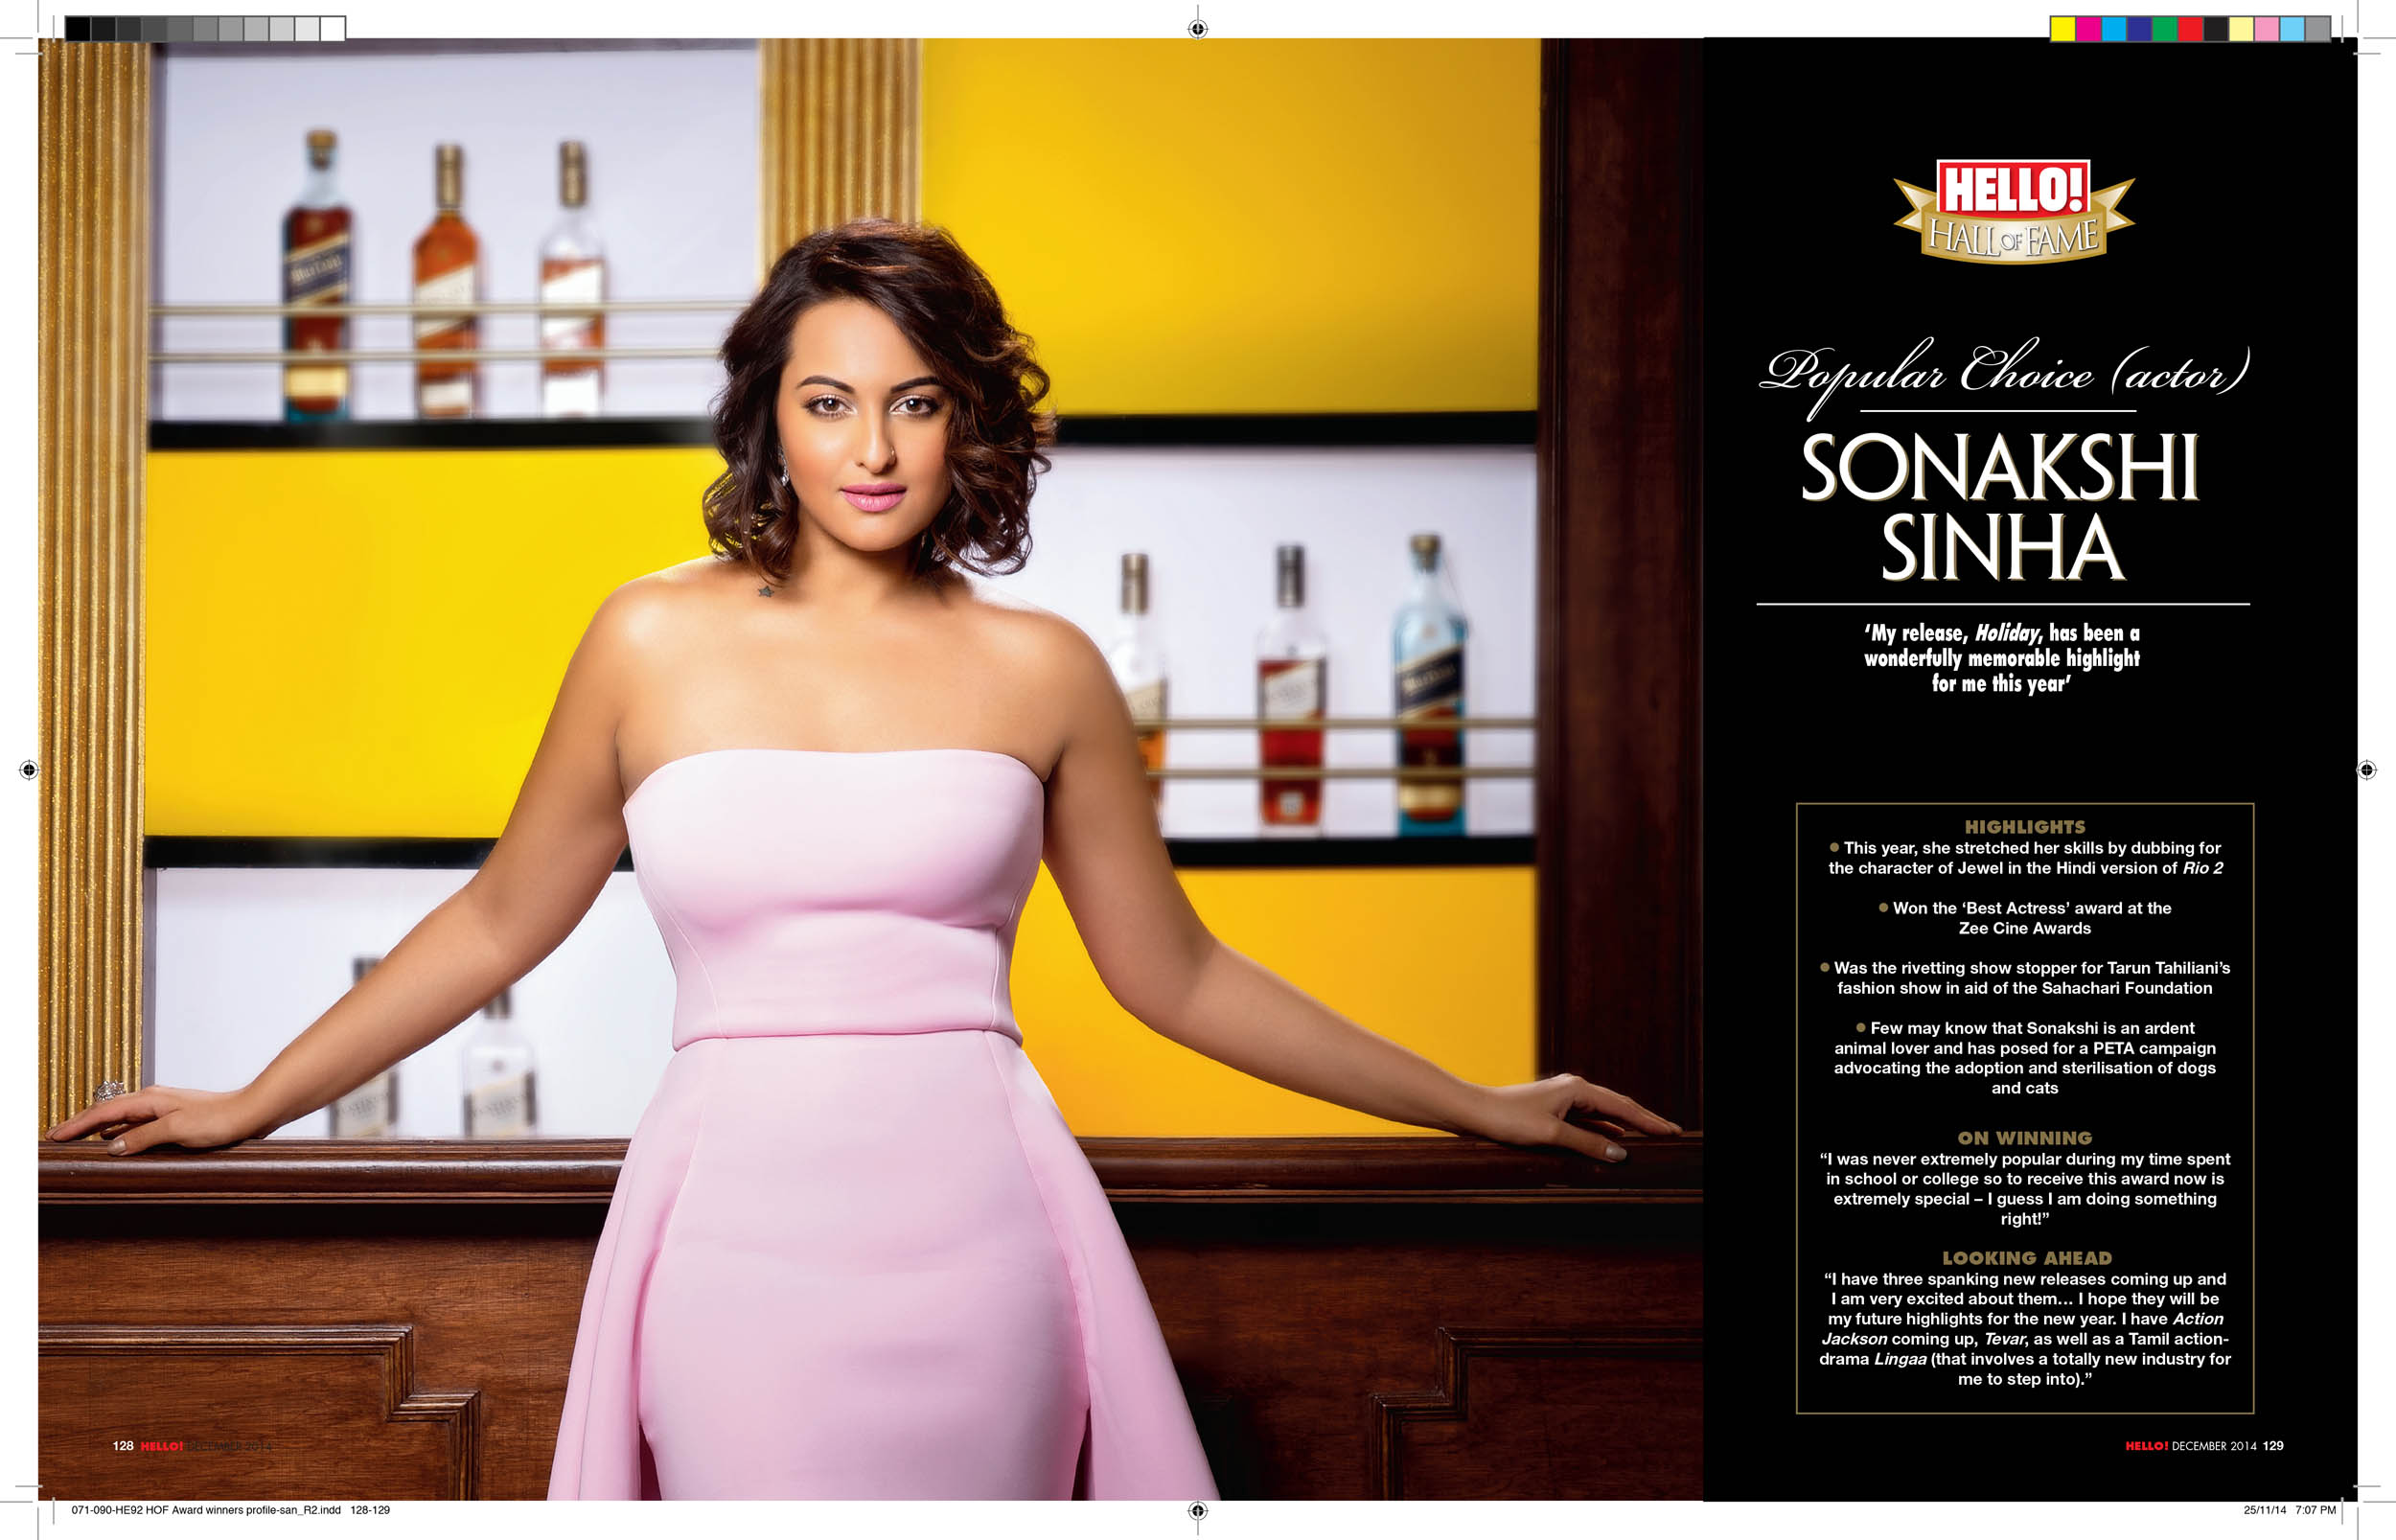 Best Bollywood Photographer in India Vikram Bawa, Actress Sonakshi Sinha for Hello Magazine, Shooting with Star, Hello Awards,  Advertising Photographer, Best Published Photographer, Best Editorial Photographer, Best Fashion Photographer  Vikram Bawa in Mumbai, India